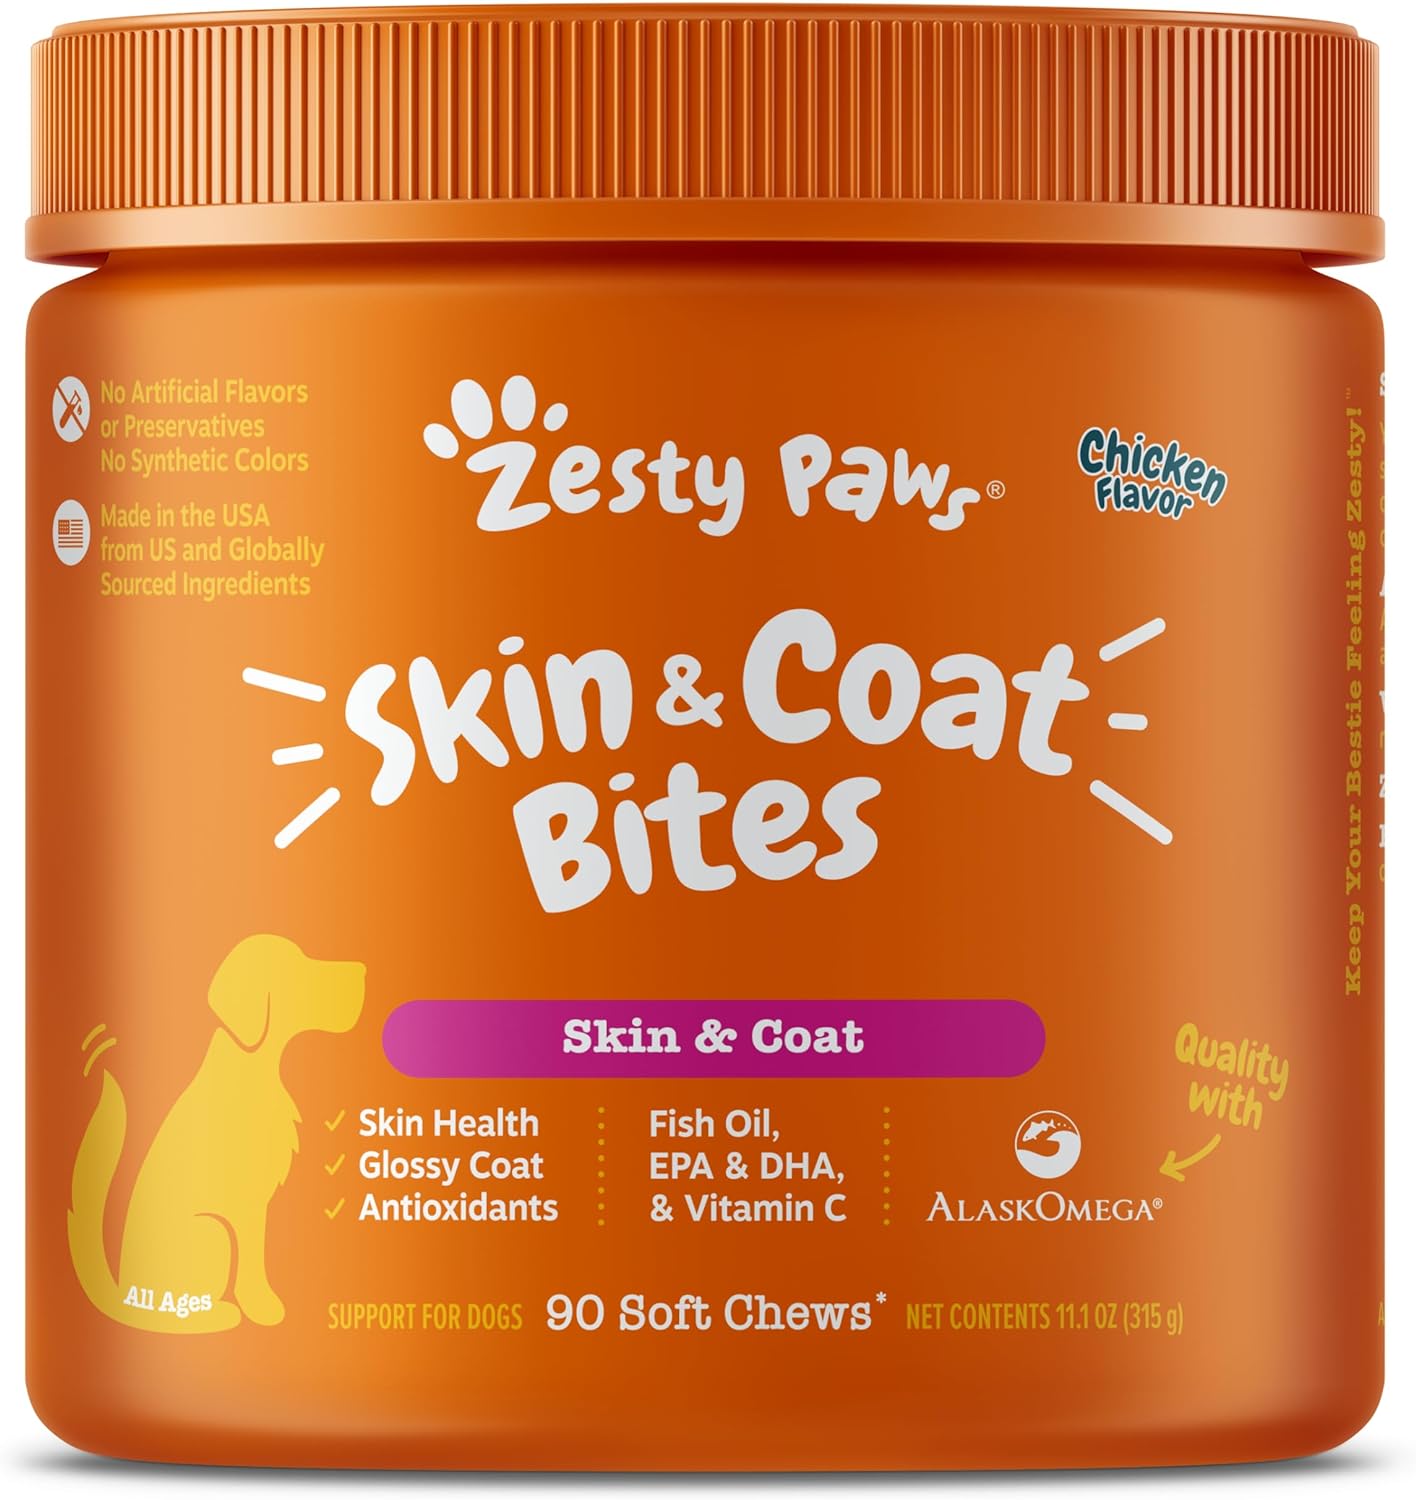 Zesty Paws Omega 3 Alaskan Fish Oil Chew Treats for Dogs - with AlaskOmega for EPA & DHA Fatty Acids - Hip & Joint Support + Skin & Coat Chicken Flavor (90 Soft Chews)